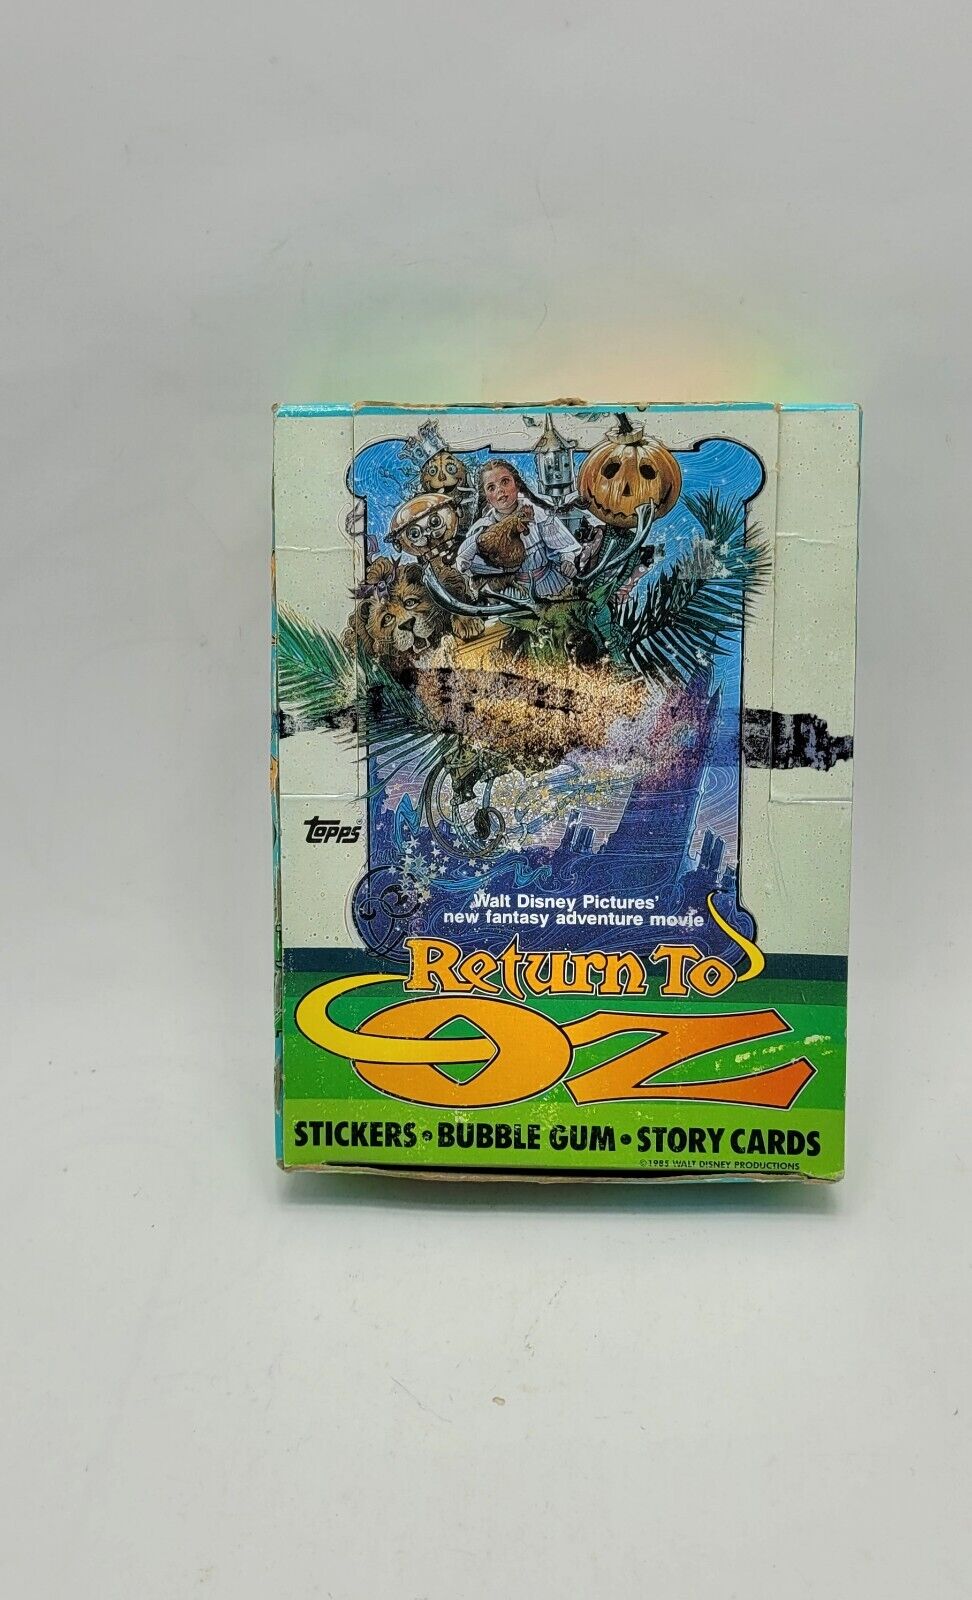 1985 Topps Return to Oz Stickers Bubble Gum, Story Cards Factory Sealed Packs